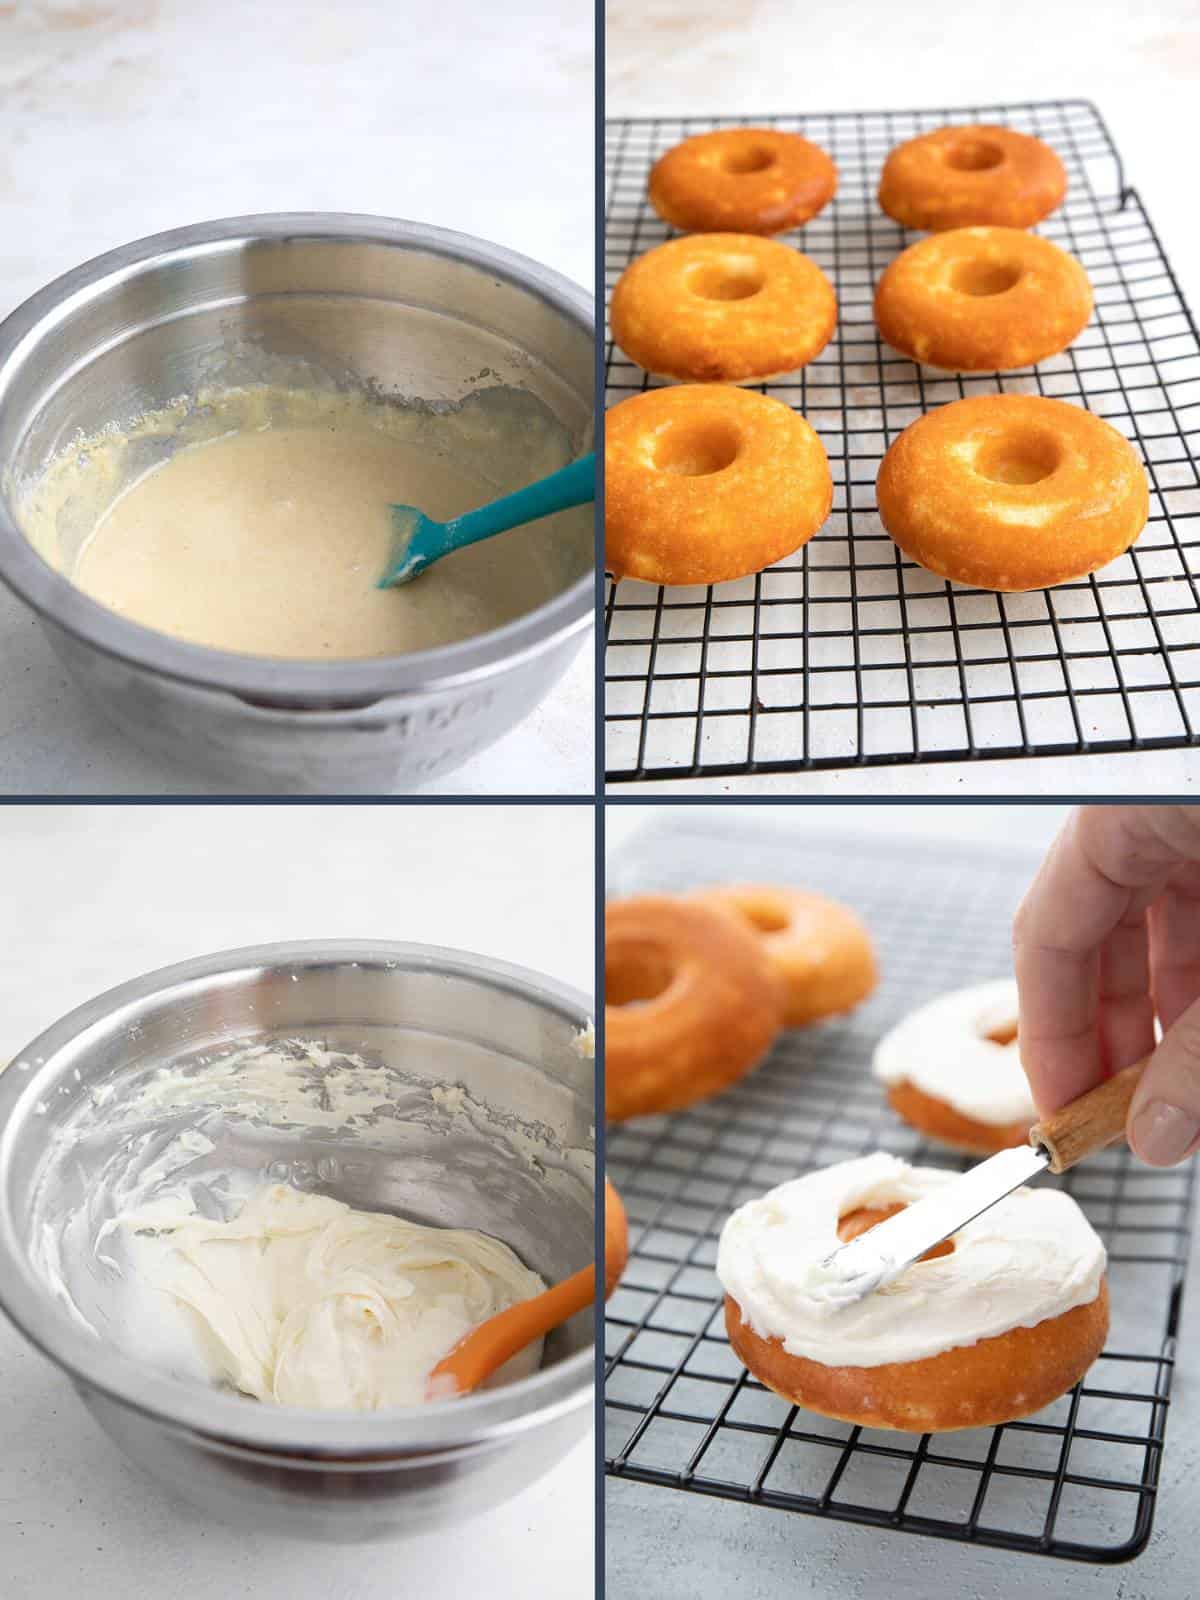 A collage of 4 images showing how to make Protein Donuts.